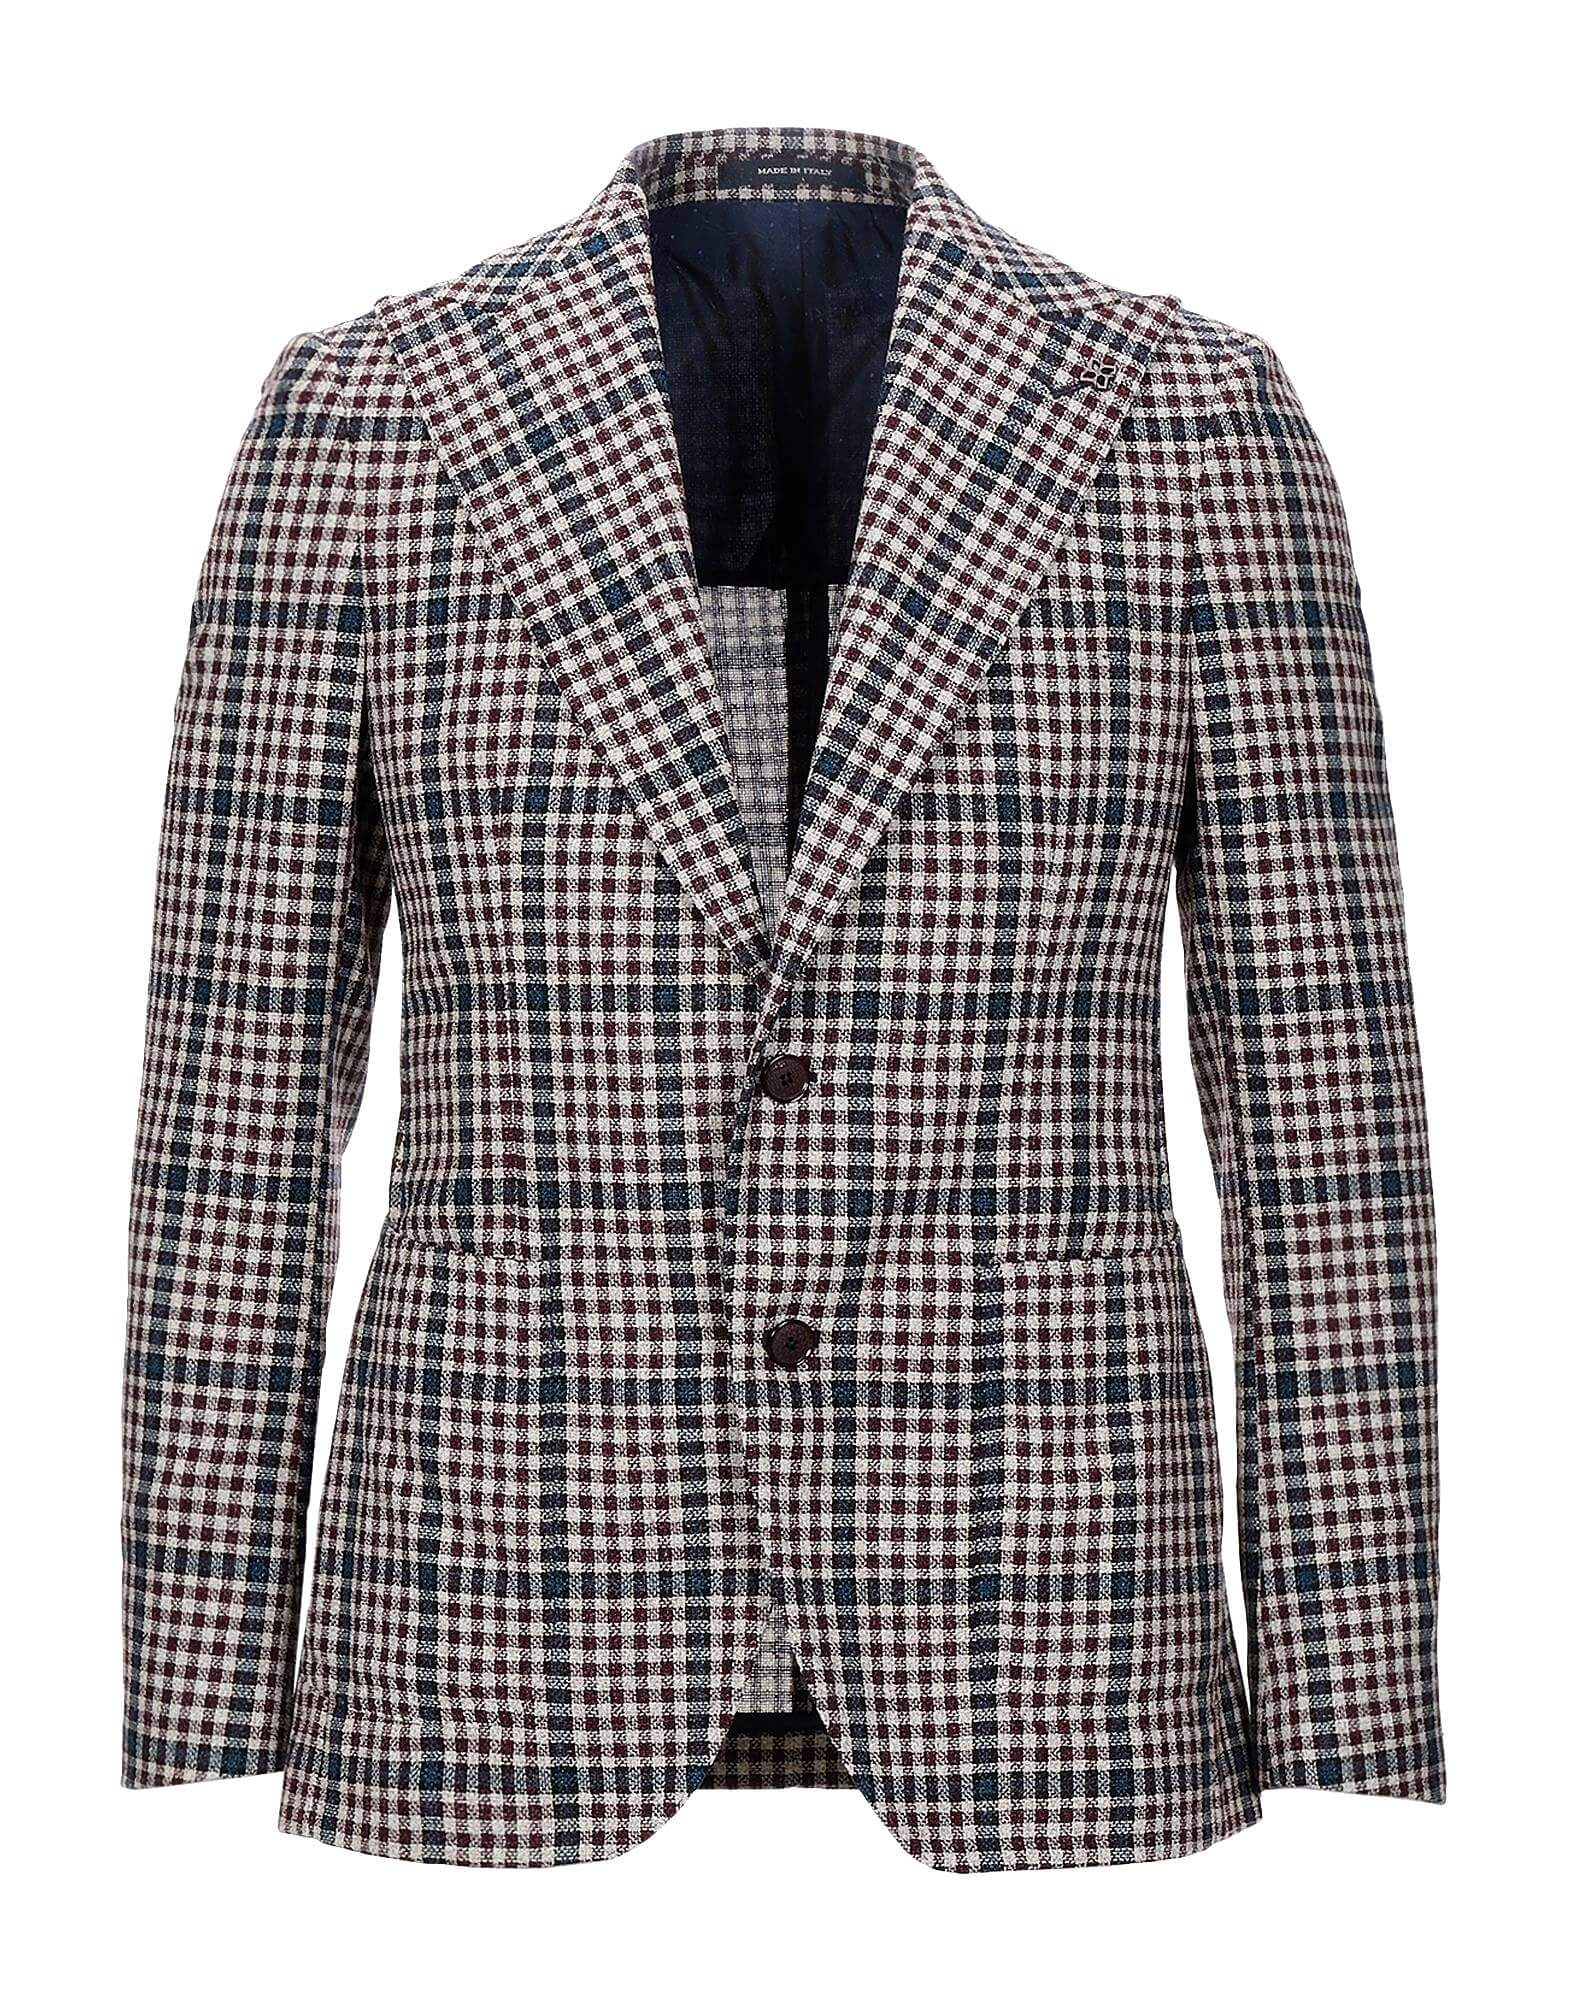 Plaid Jackets - Special feature on Plaid Jacket Codes! Featured Men's ...